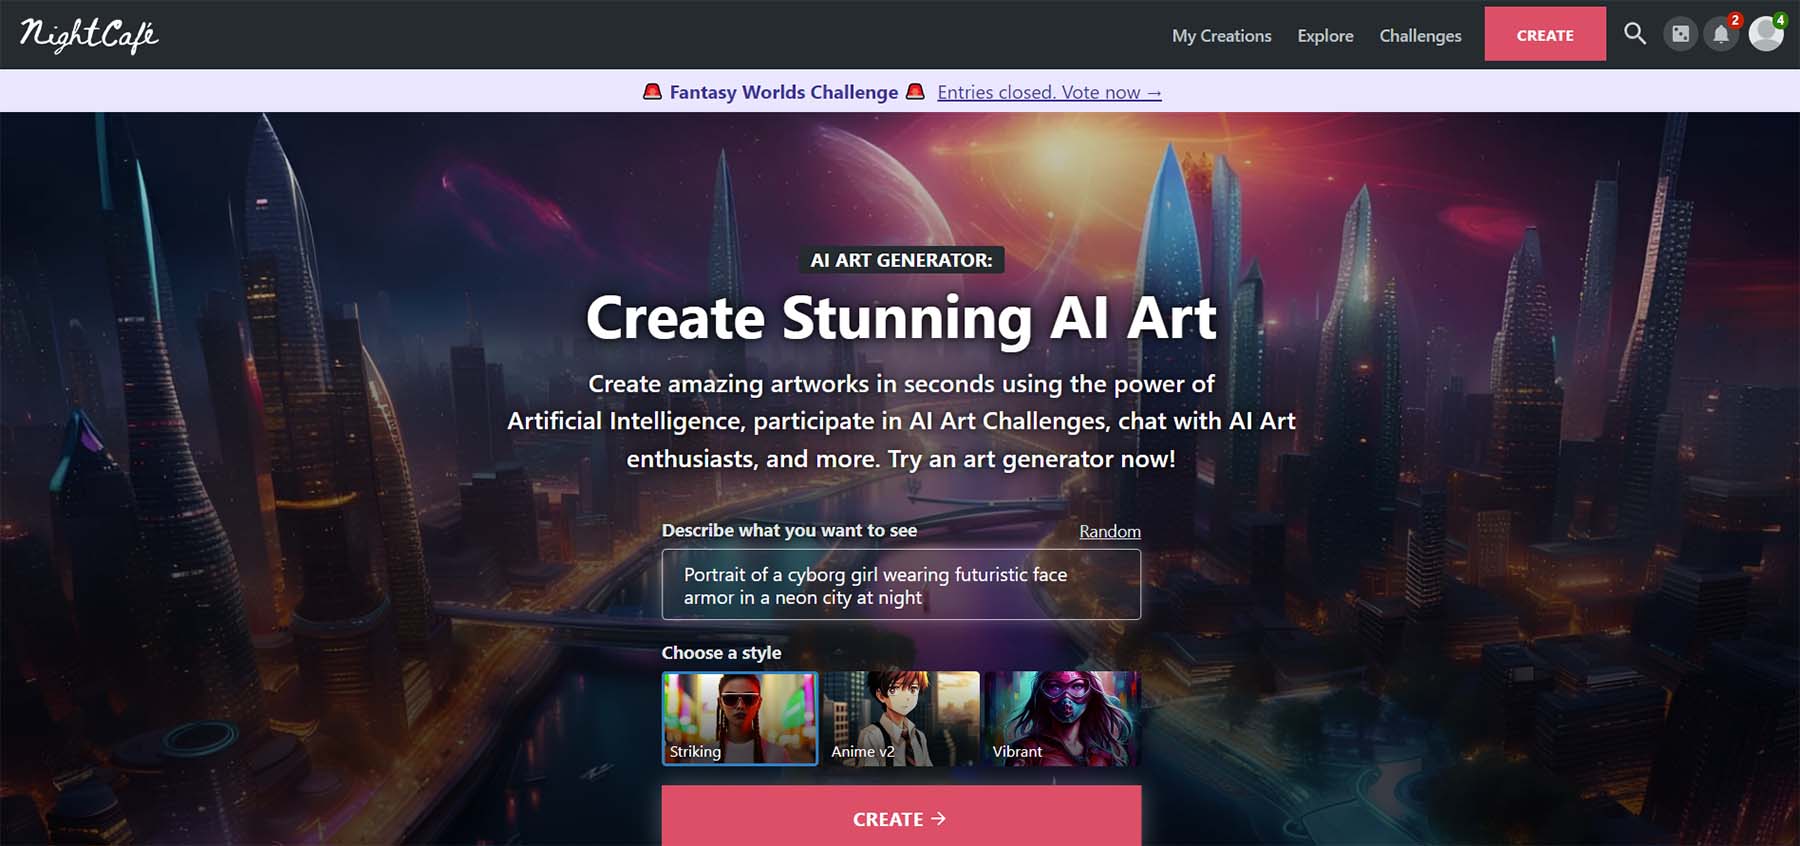 35 Stunning Game Website Design examples - See Design possibilities